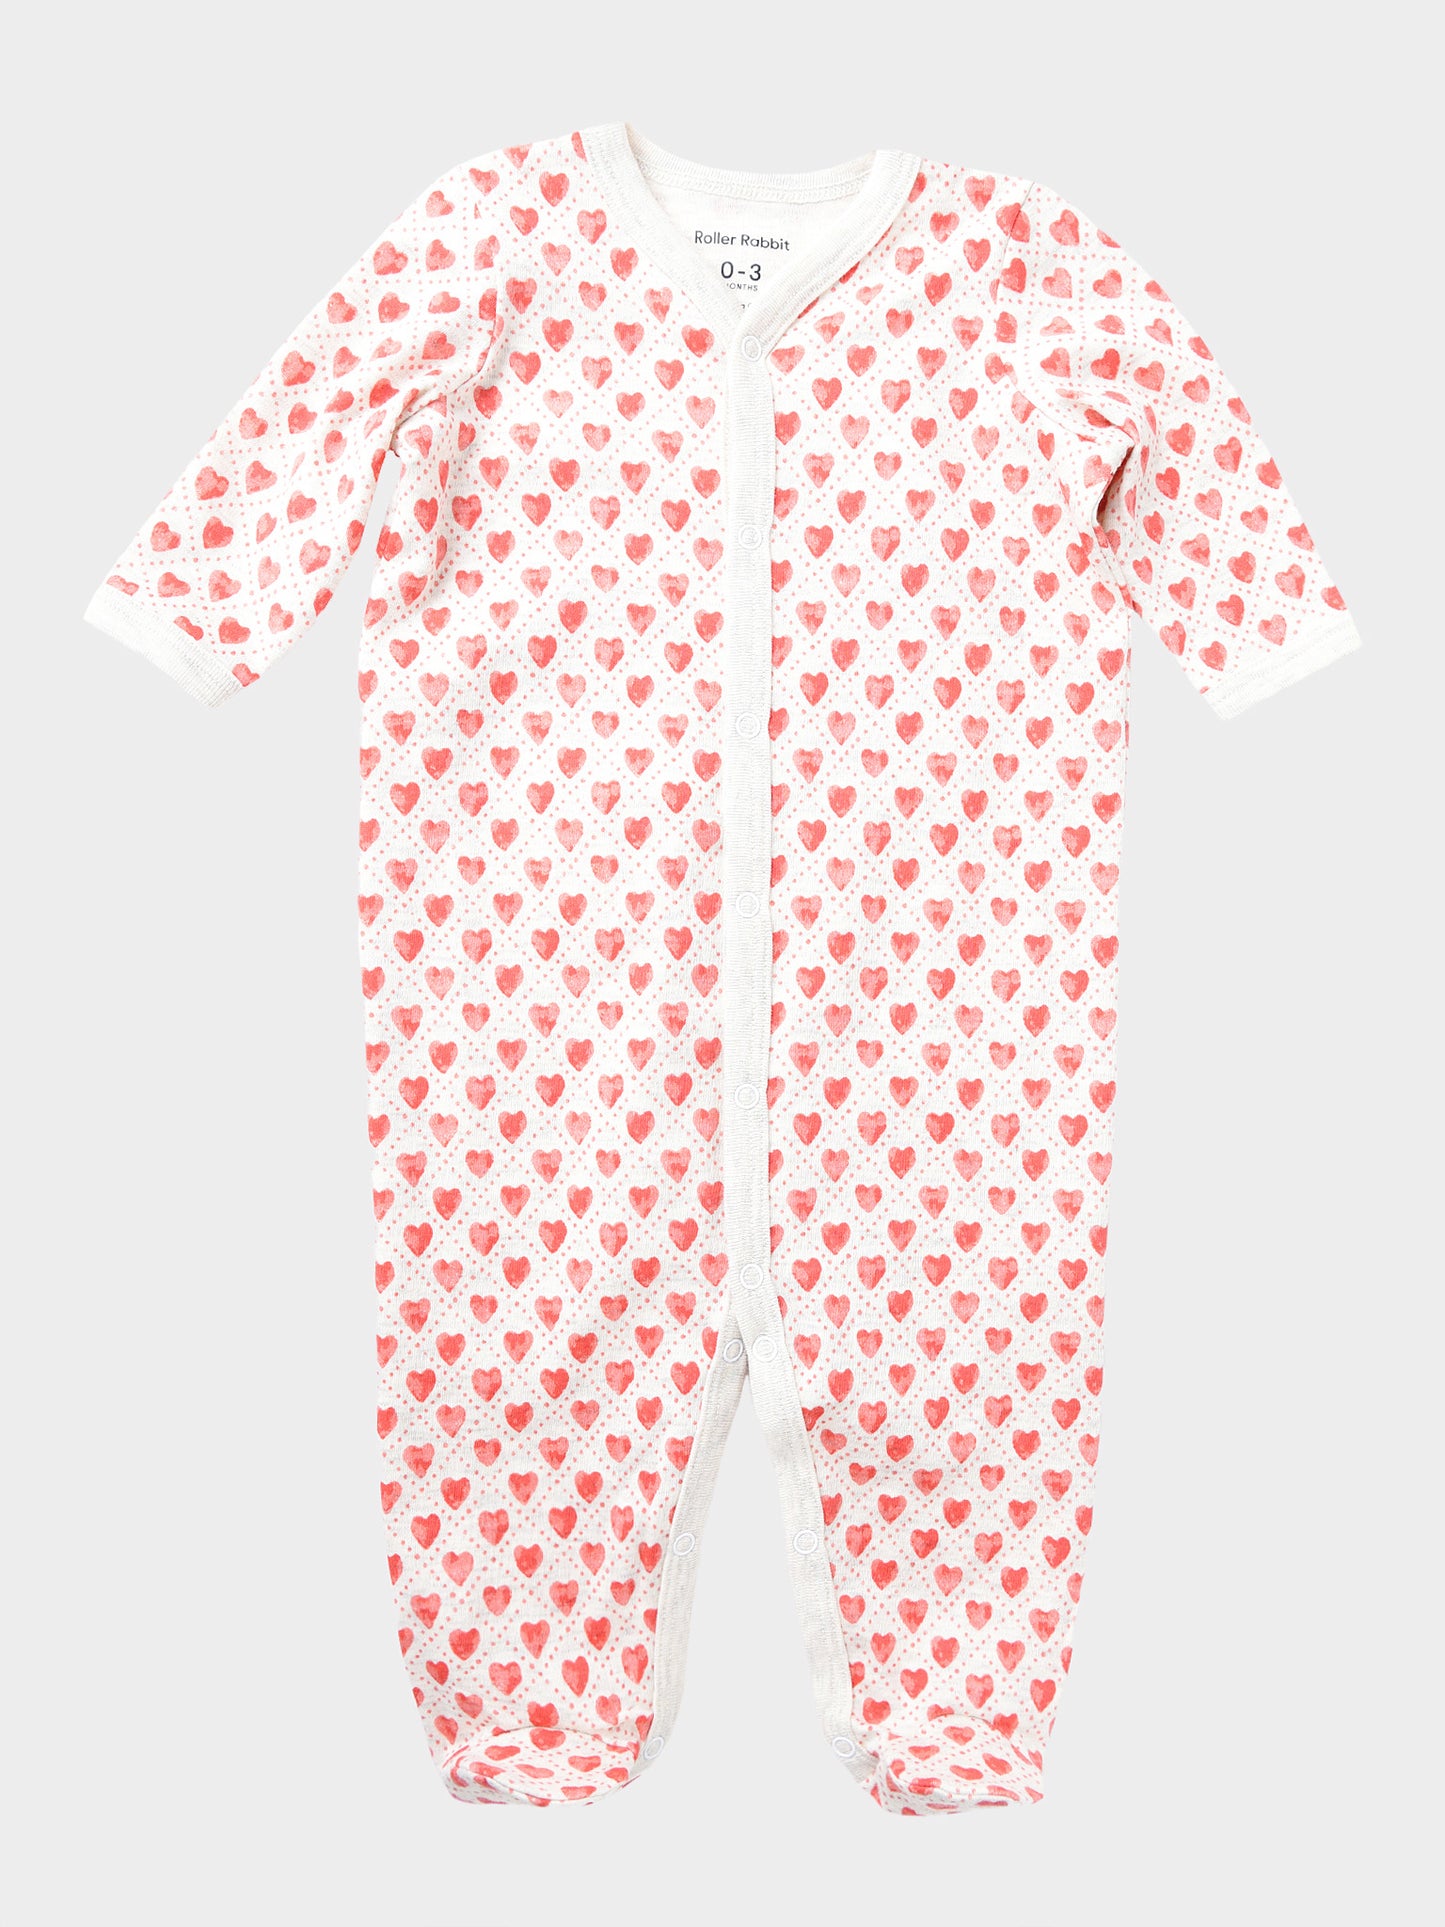 Roller Rabbit Infant Quilted Hearts Footie Pajama